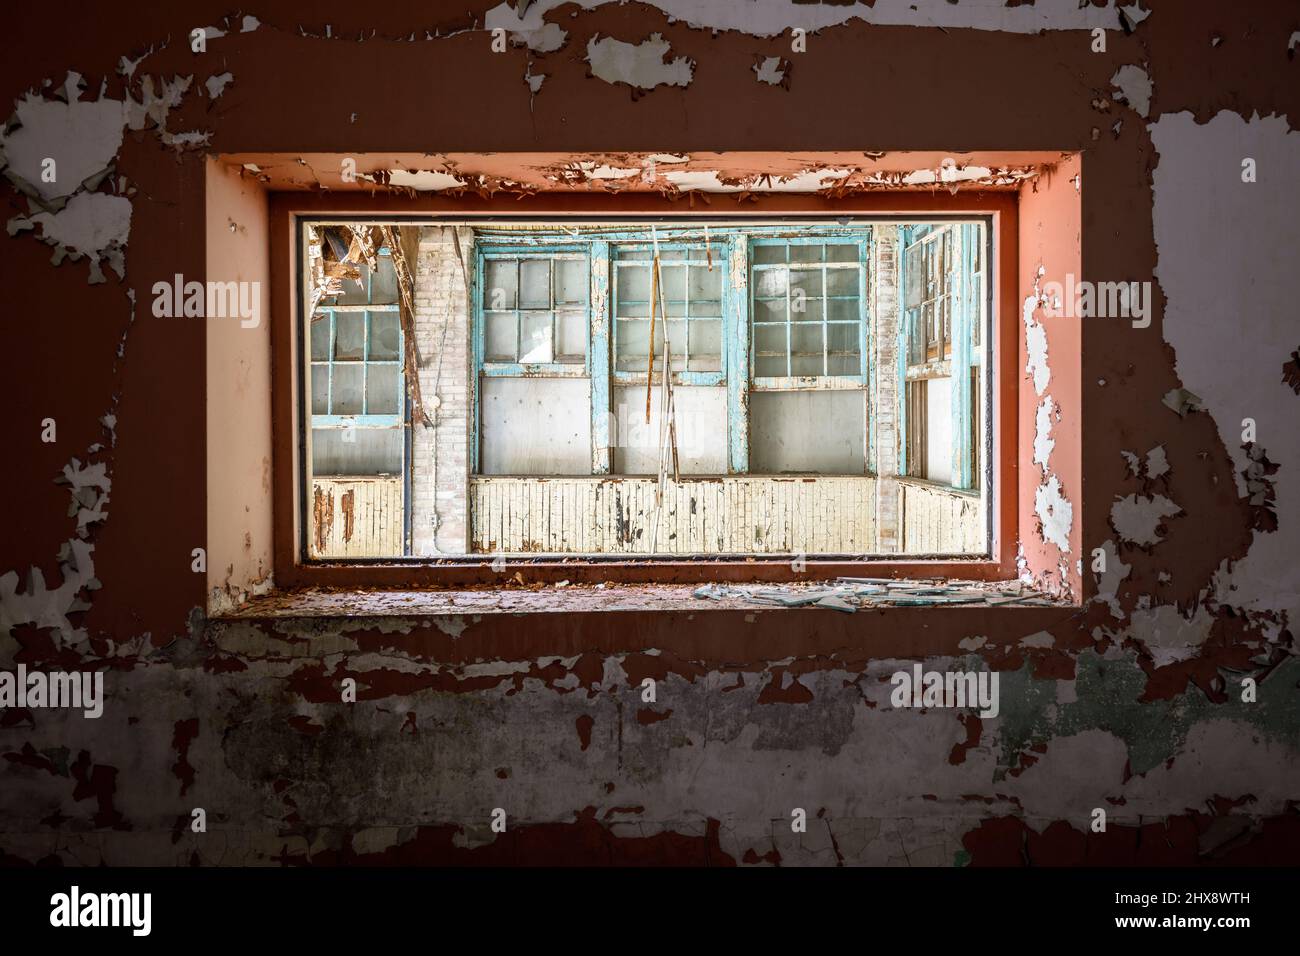 Looking at old windows through a window frame with peeling paint. Stock Photo